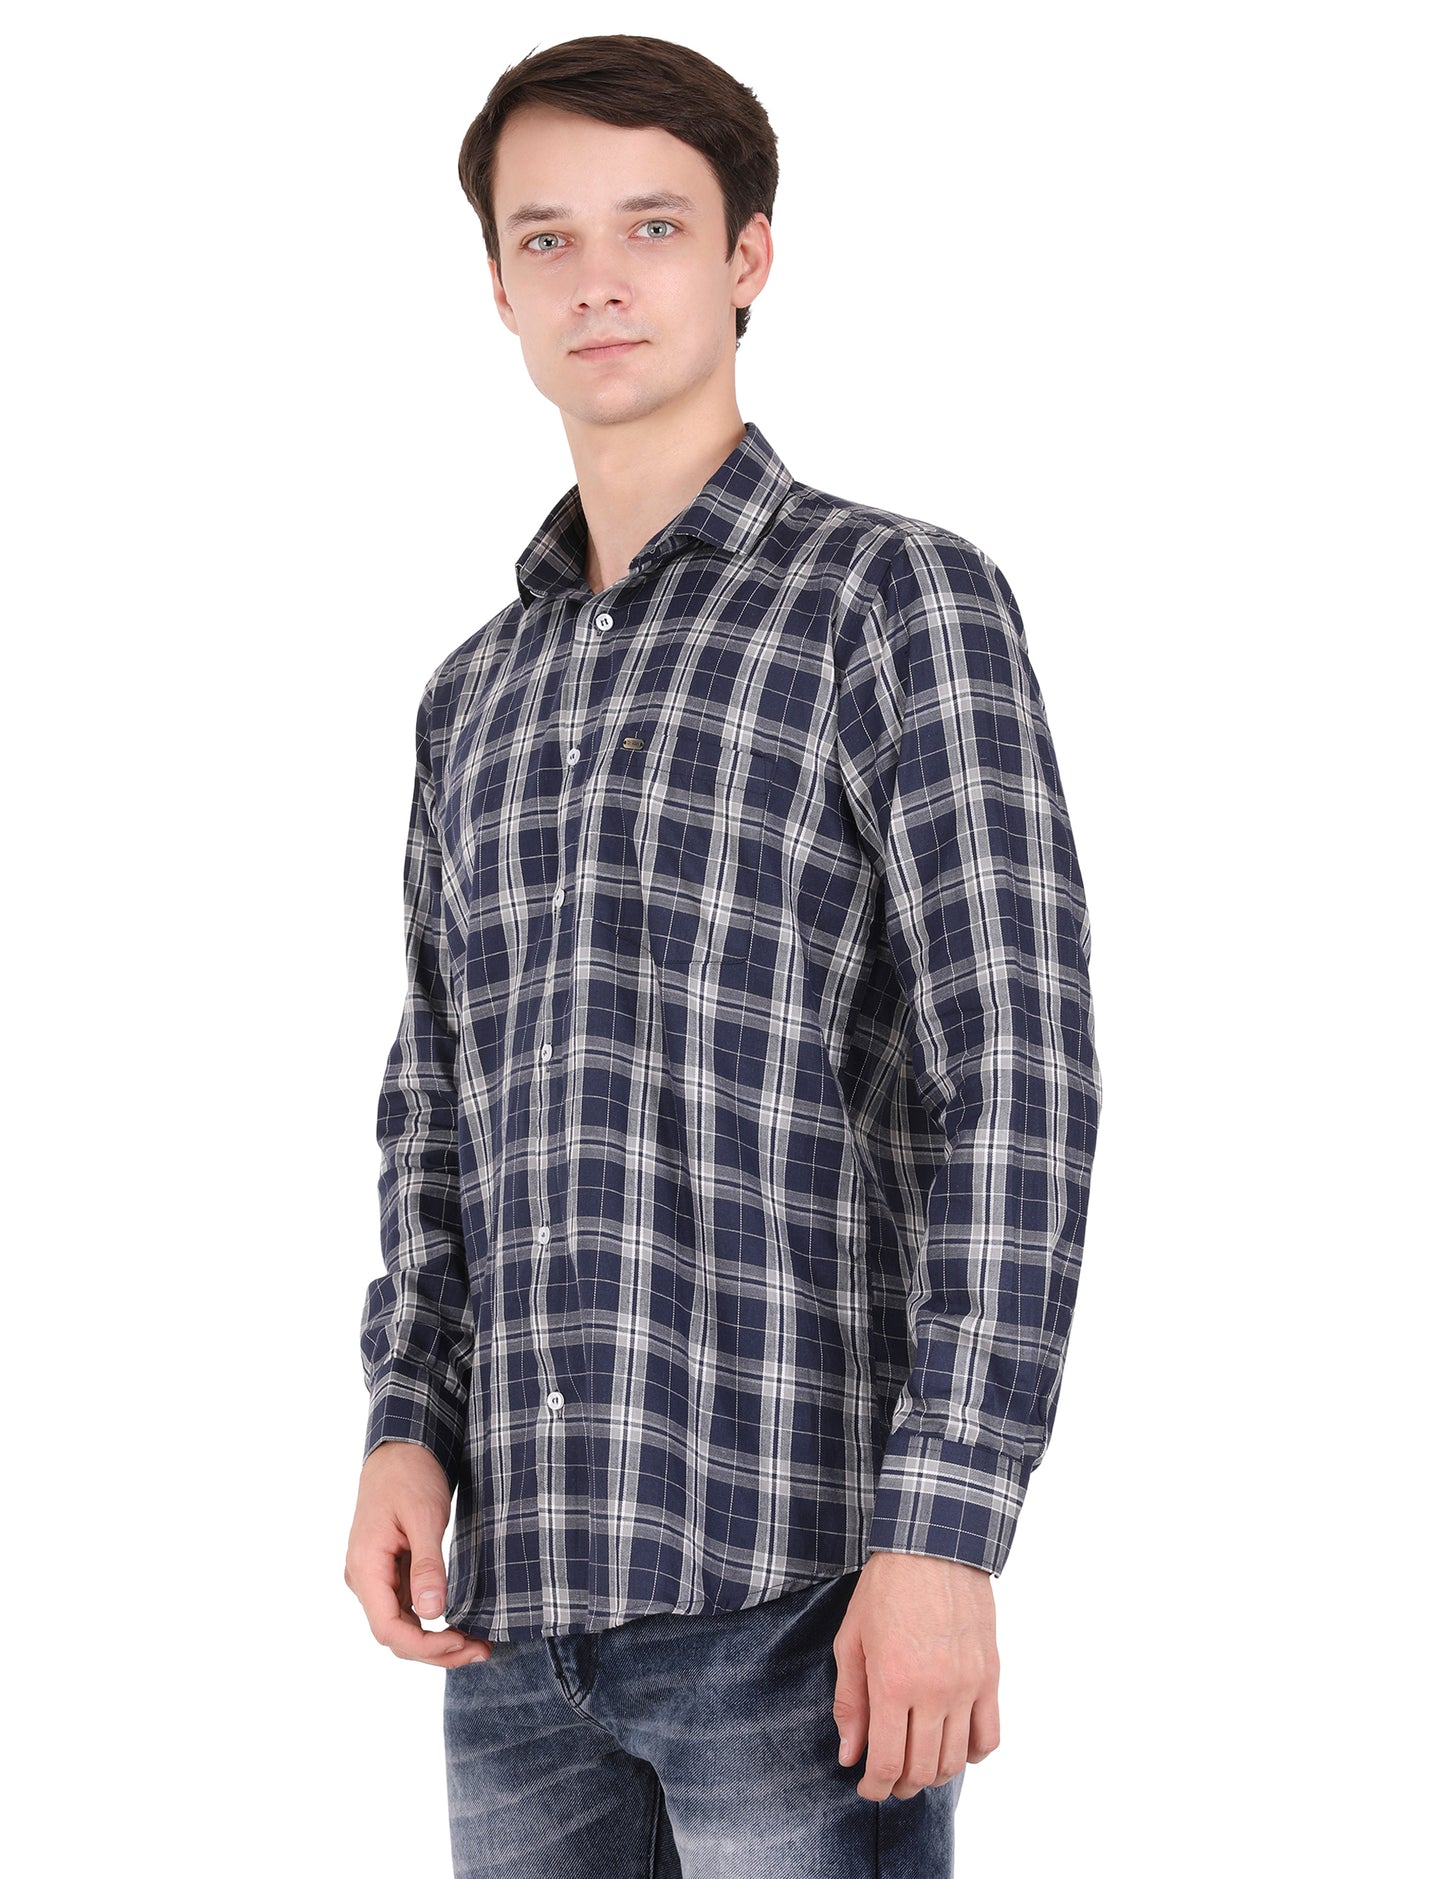 Checkered Elegance: Printed Blue Shirt with Classic Check Design